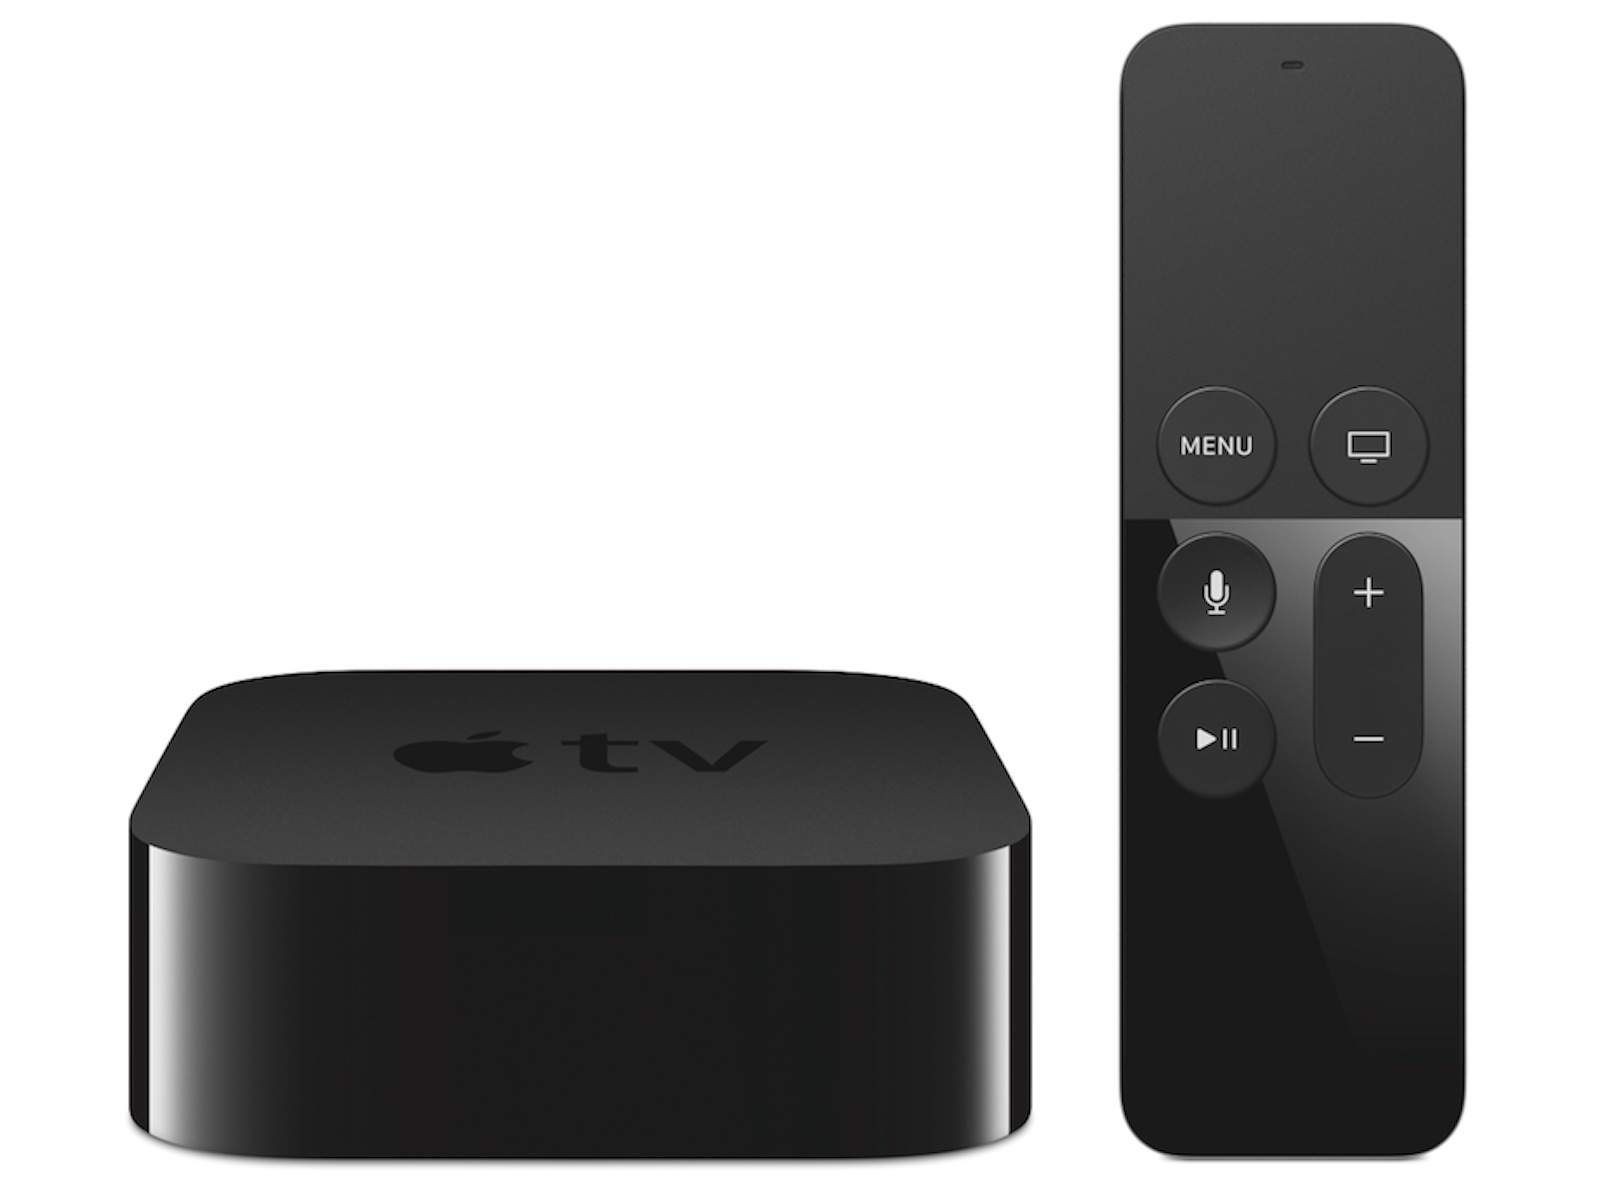 The best controller for Apple TV is the one you'll use.